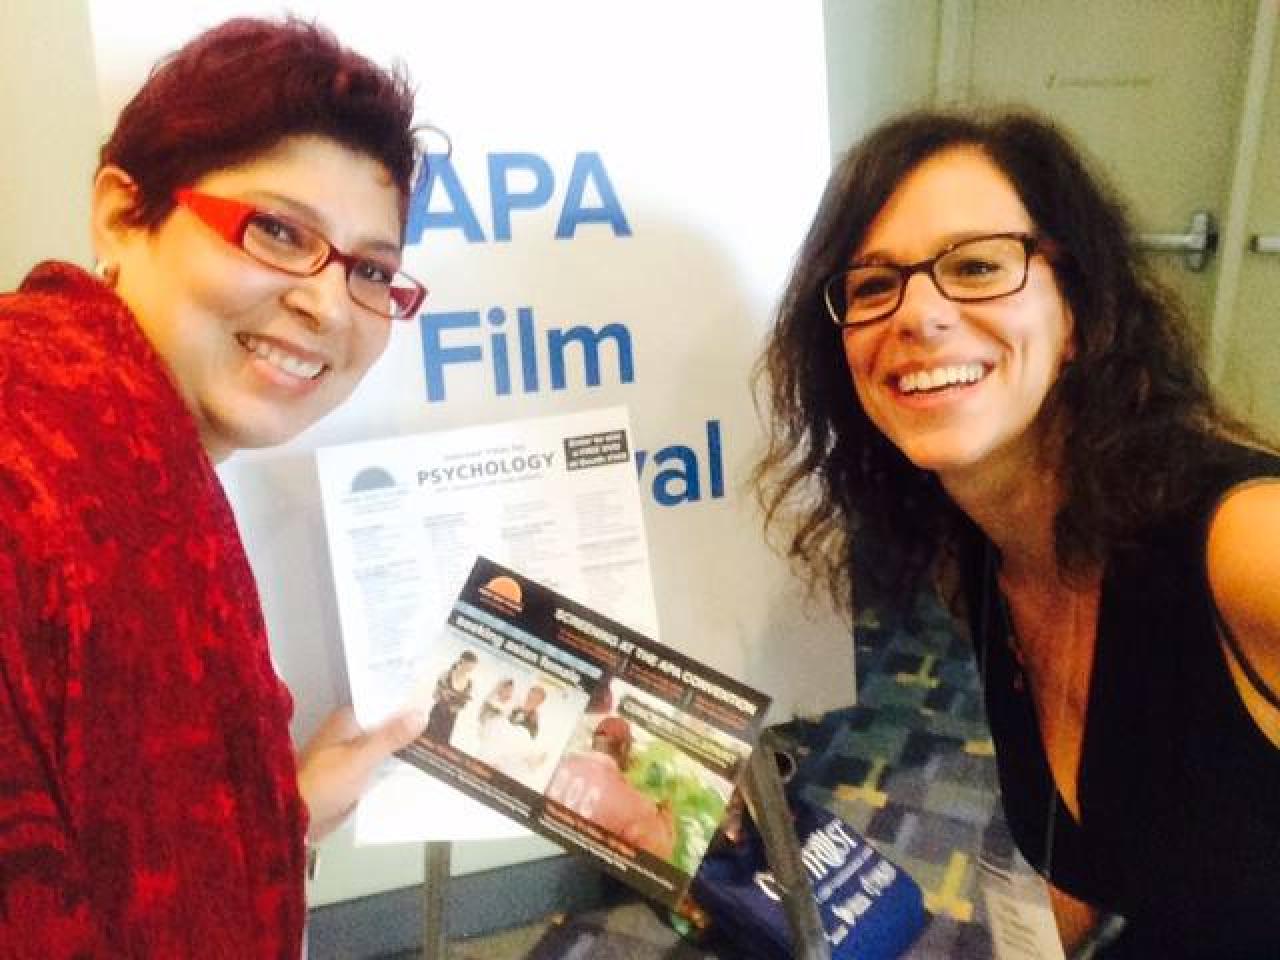 New Day Filmmaker Cindy Burstein and Gigi, from the APA social media, smile and lean into the frame in front of a board that reads “APA Film Festival.” Gigi holds a promotional New Day flyer.